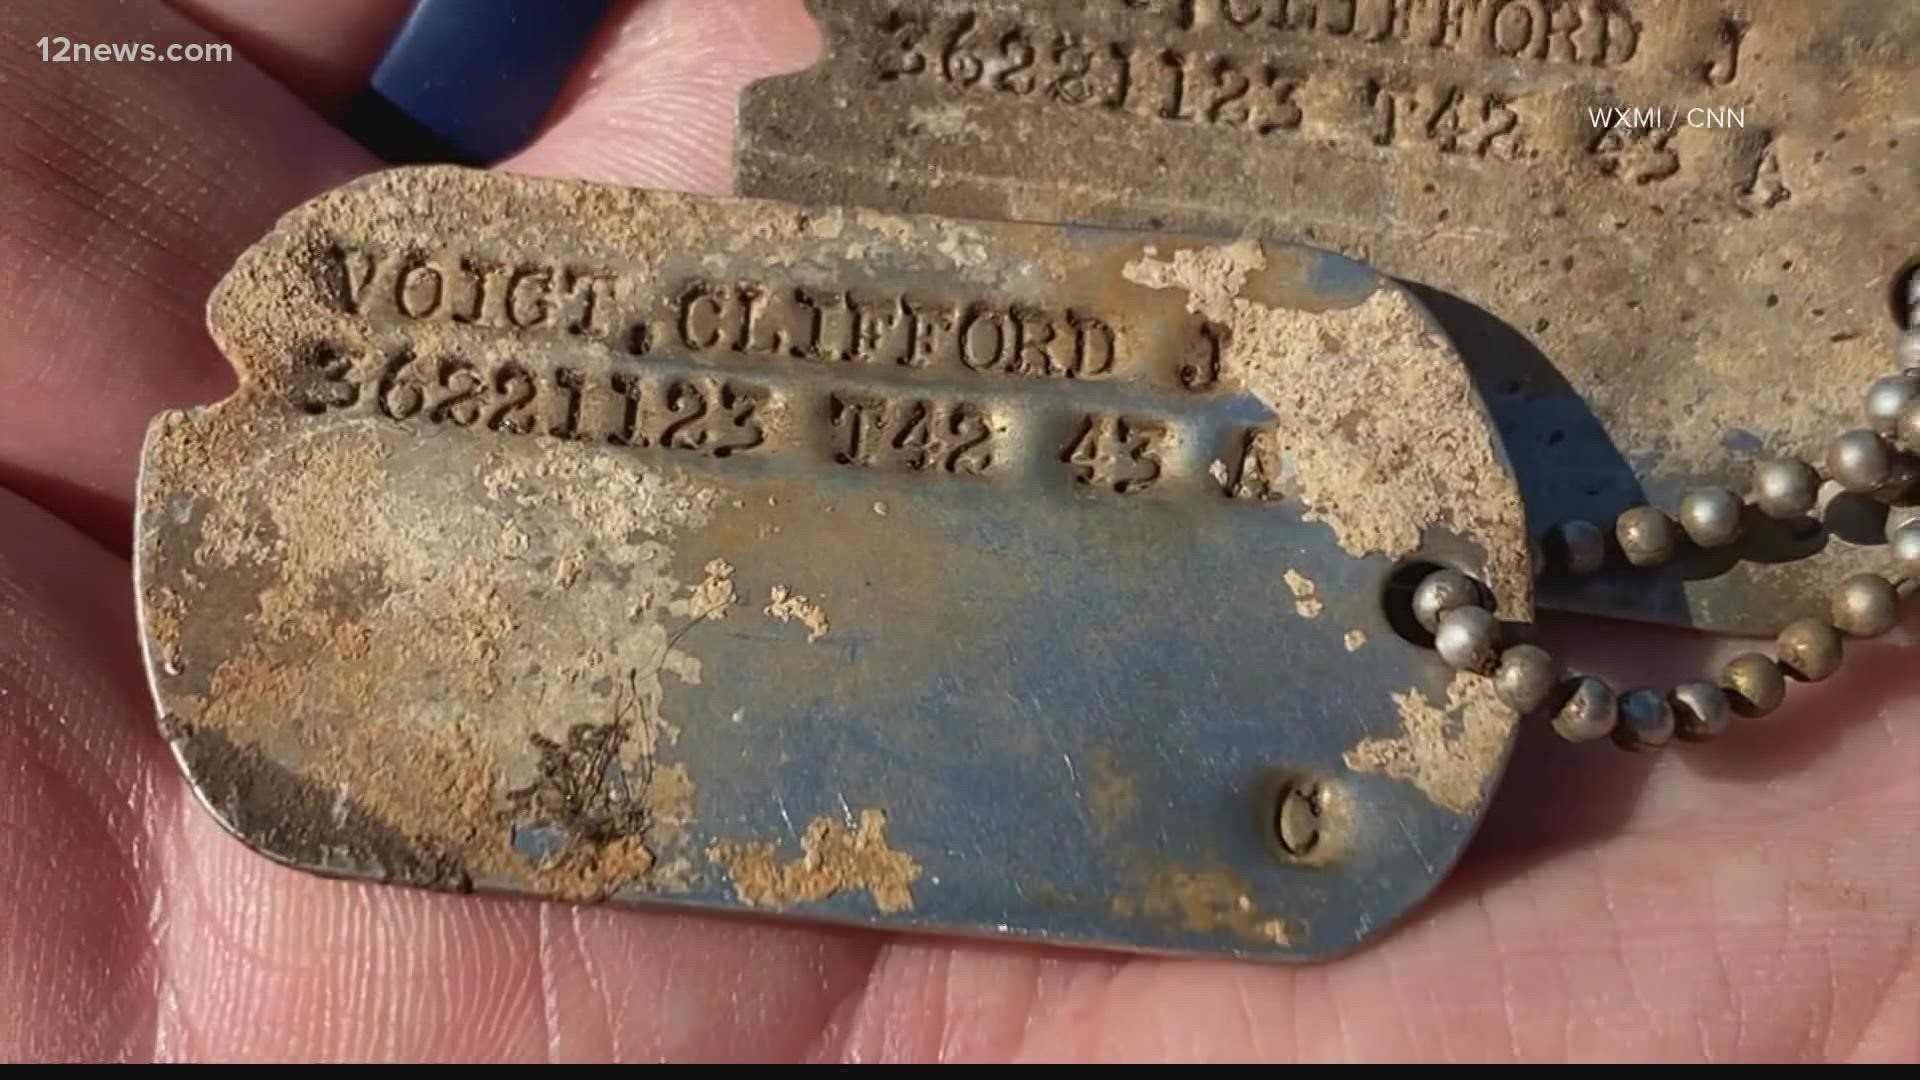 Adam Gross loves hunting for treasure, so he took up magnet fishing. Recently, he pulled dog tags belonging to Mesa WWII veteran Clifford Voigt out of the river.